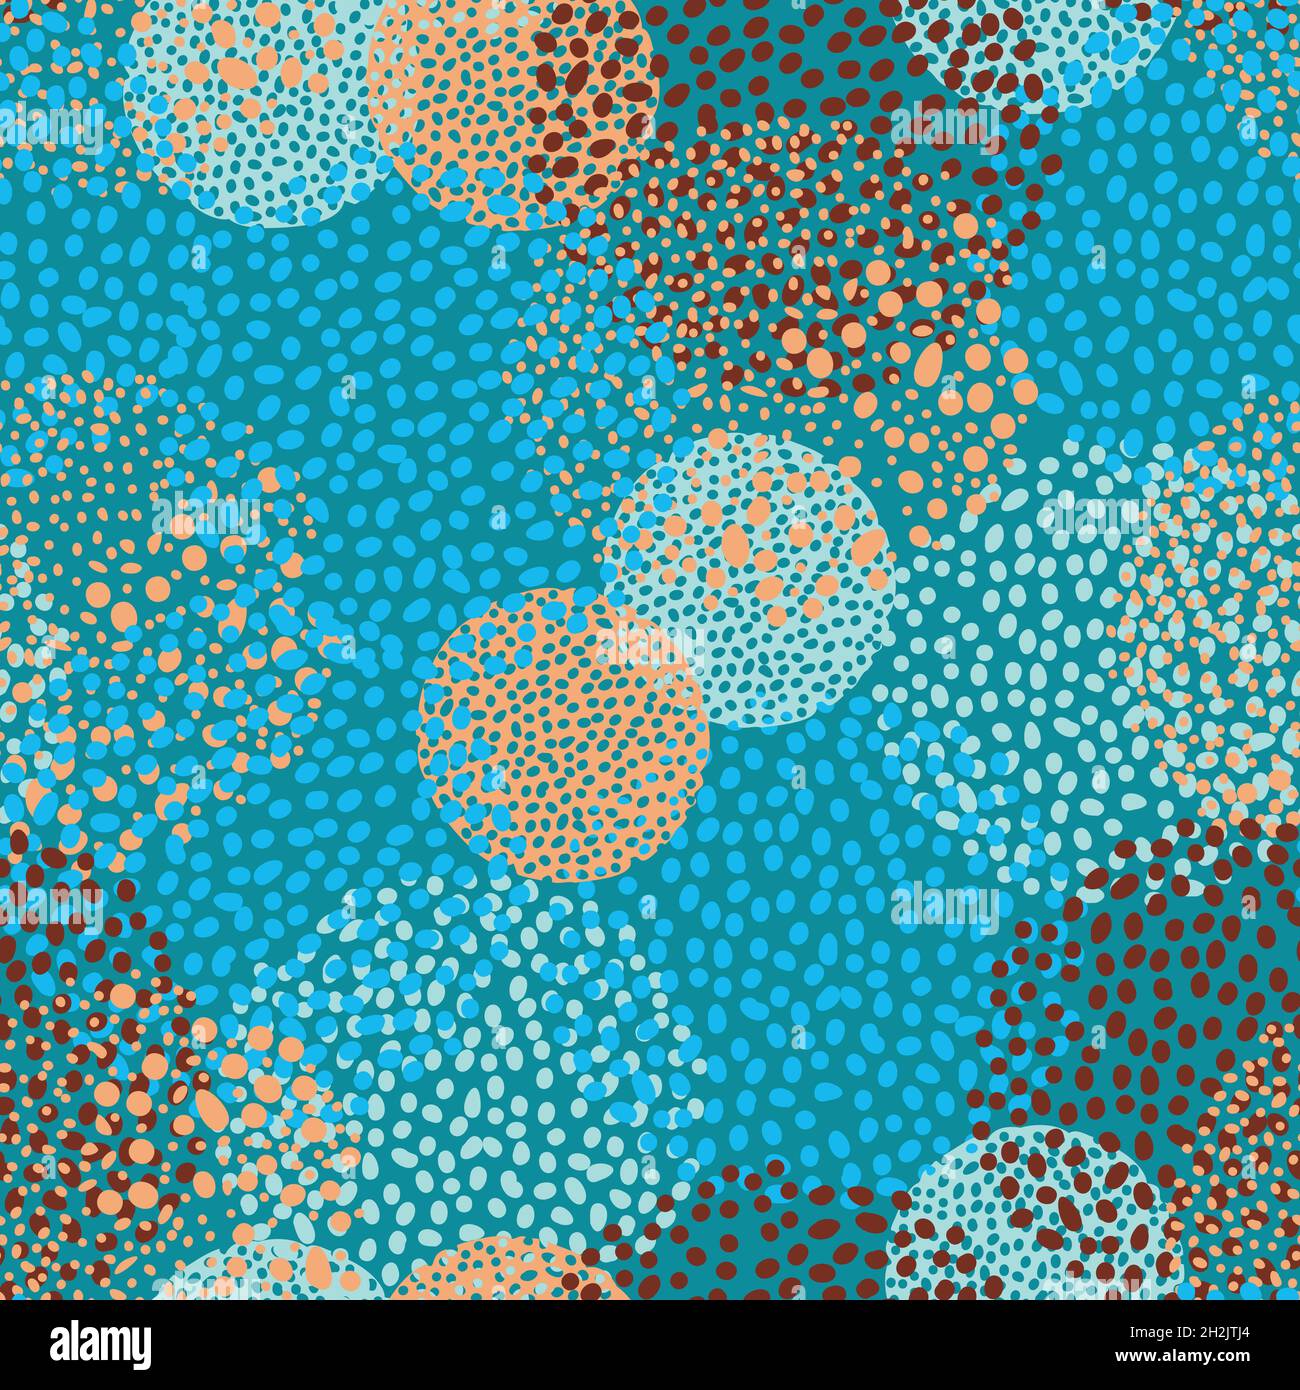 Vector seamless pattern with spots and round shapes. Stylish texture. Stock Vector